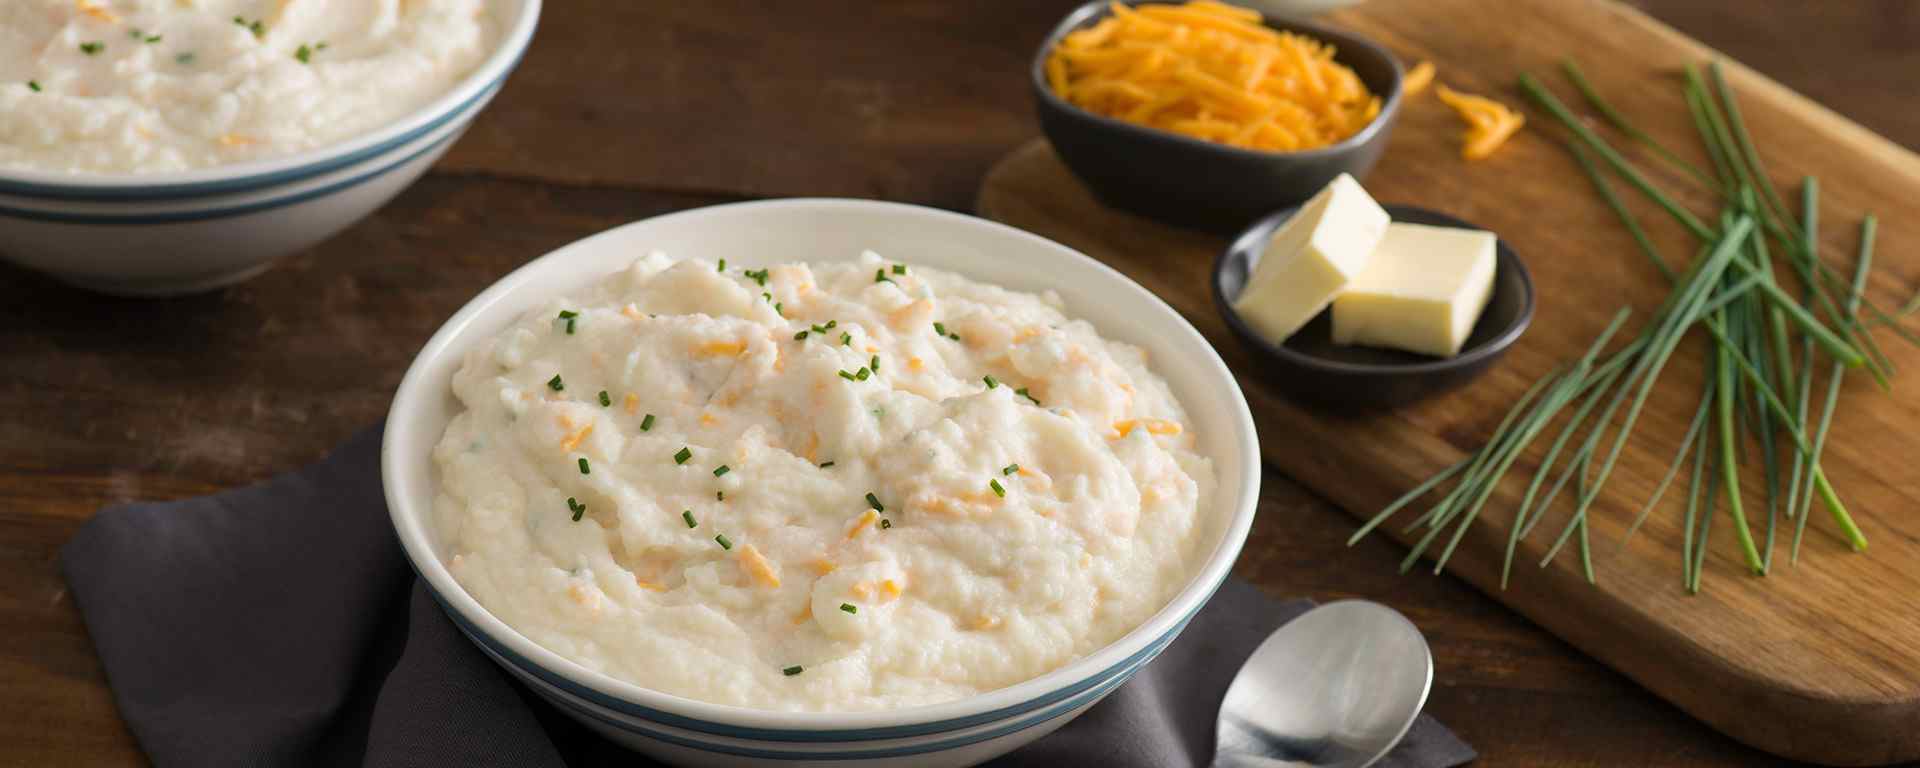 Photo of - Creamy Cauliflower Mash with Cheddar and Chives